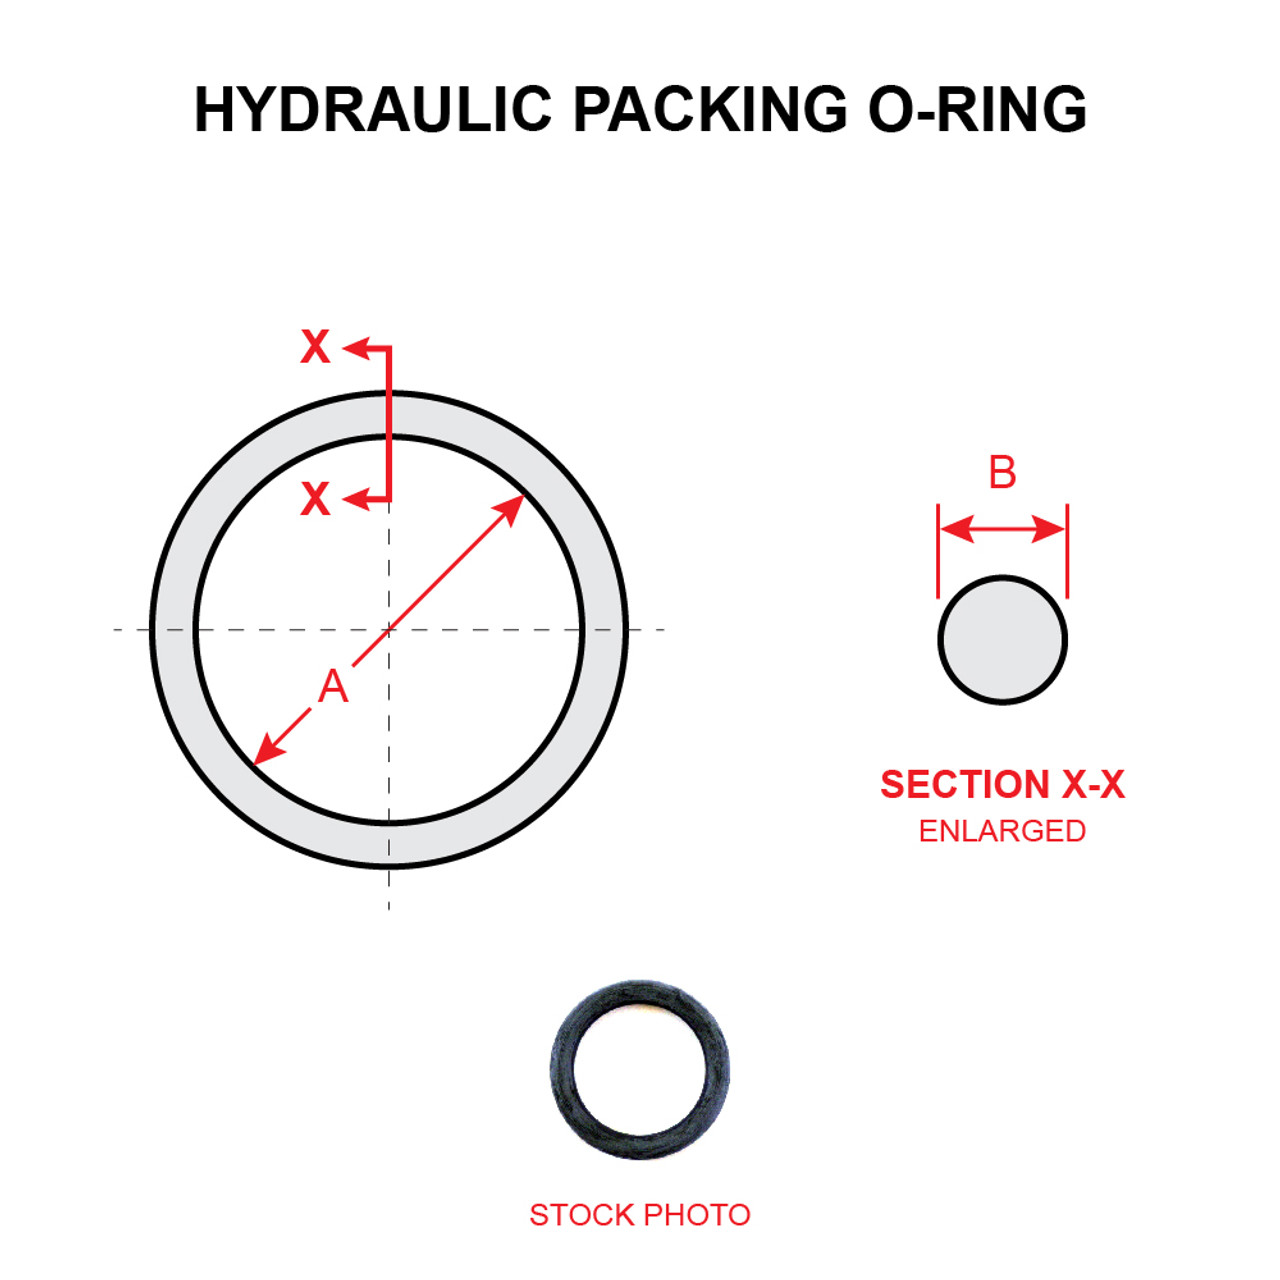 MS28775-216   HYDRAULIC PACKING O-RING